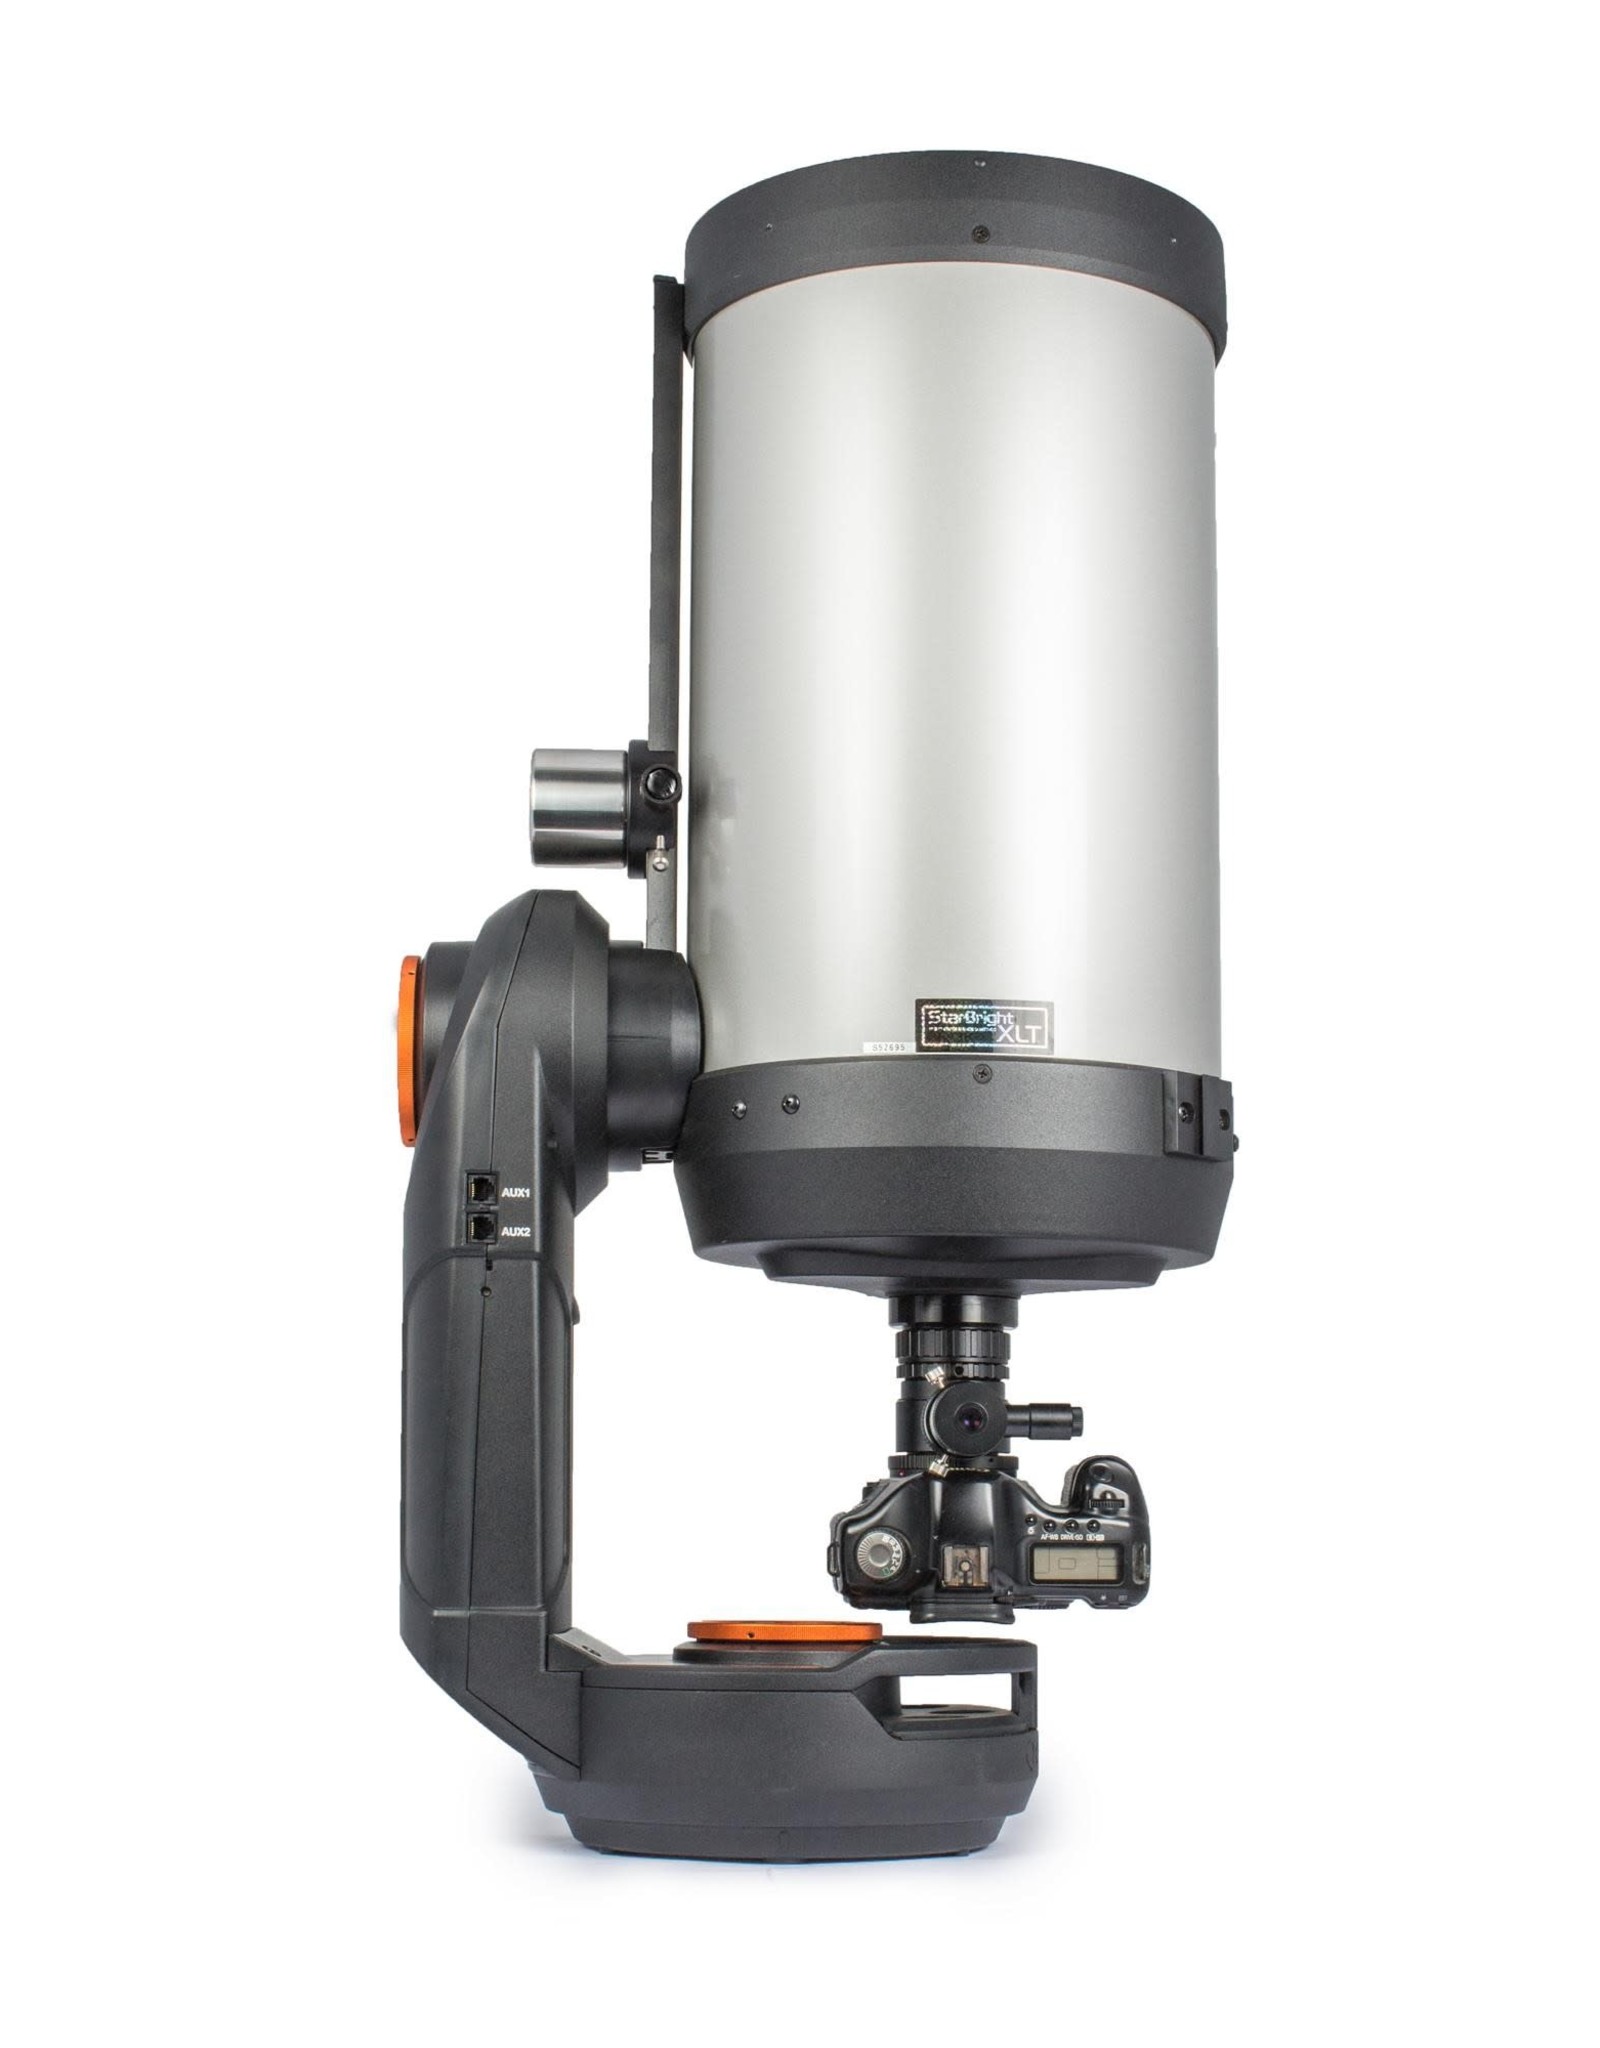 Baader Planetarium Baader 1 kg Levelling Counterweight and V-dovetail Clamp, Diam. 70mm